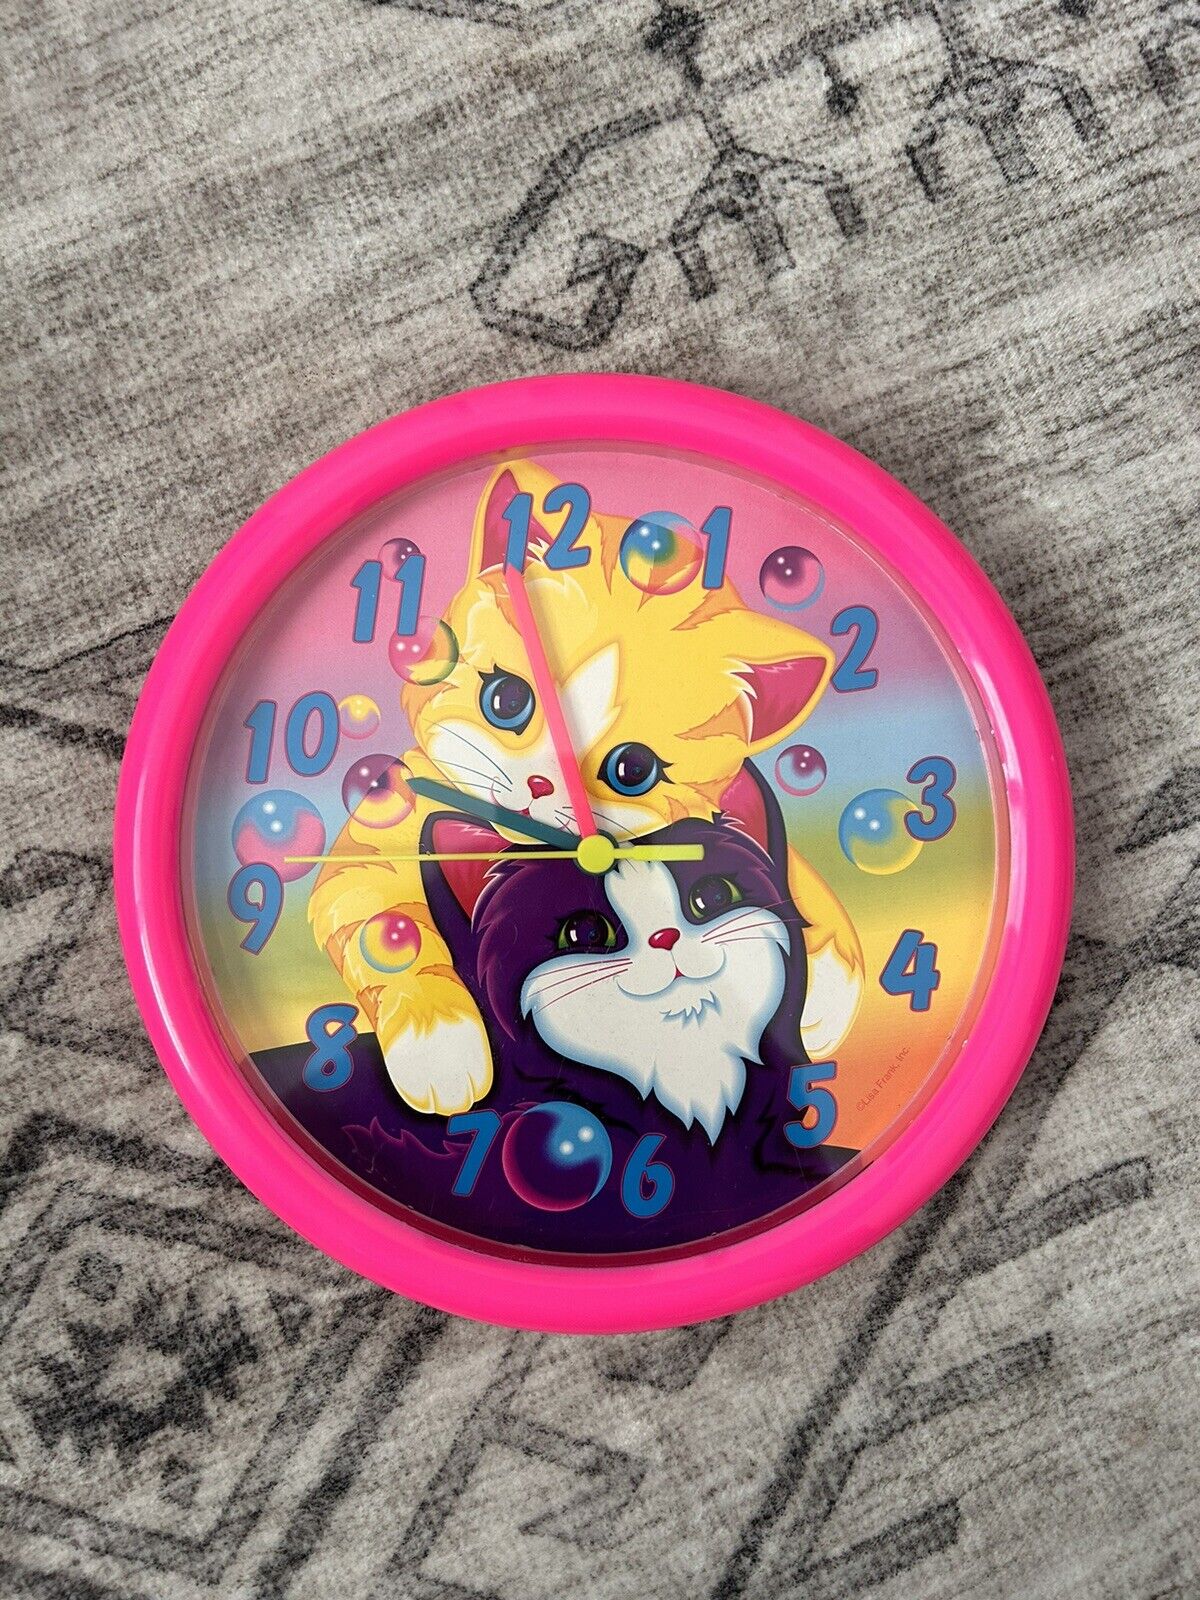 RARE Vintage Lisa Frank 90s Wall Clock Playful Kittens And Cats